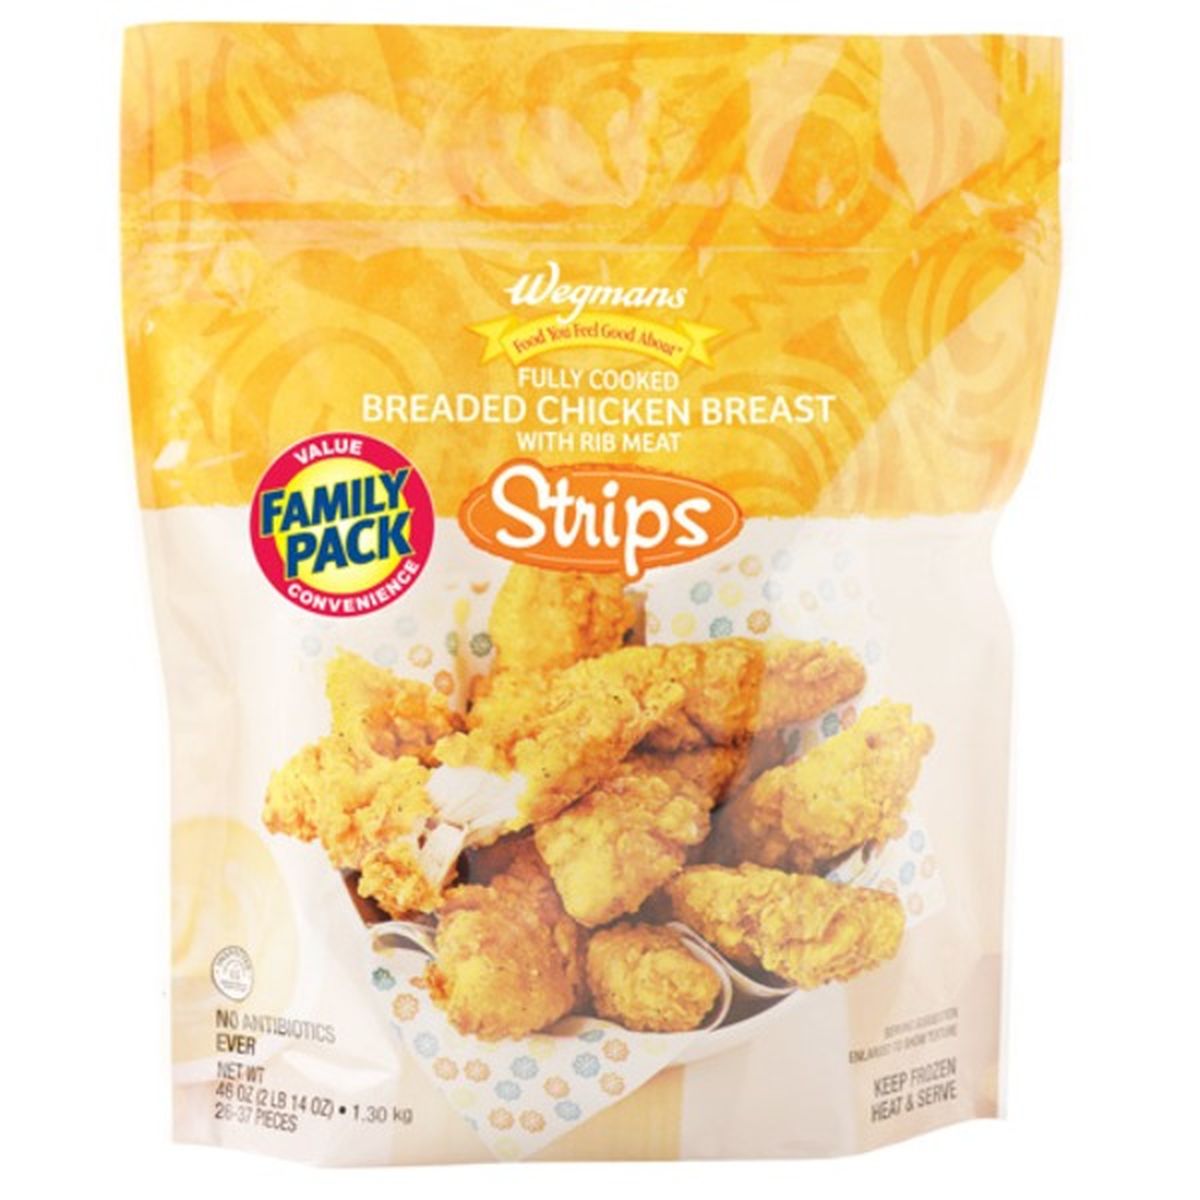 Calories in Wegmans Frozen Fully Cooked Breaded Chicken Breast Strips, FAMILY PACK